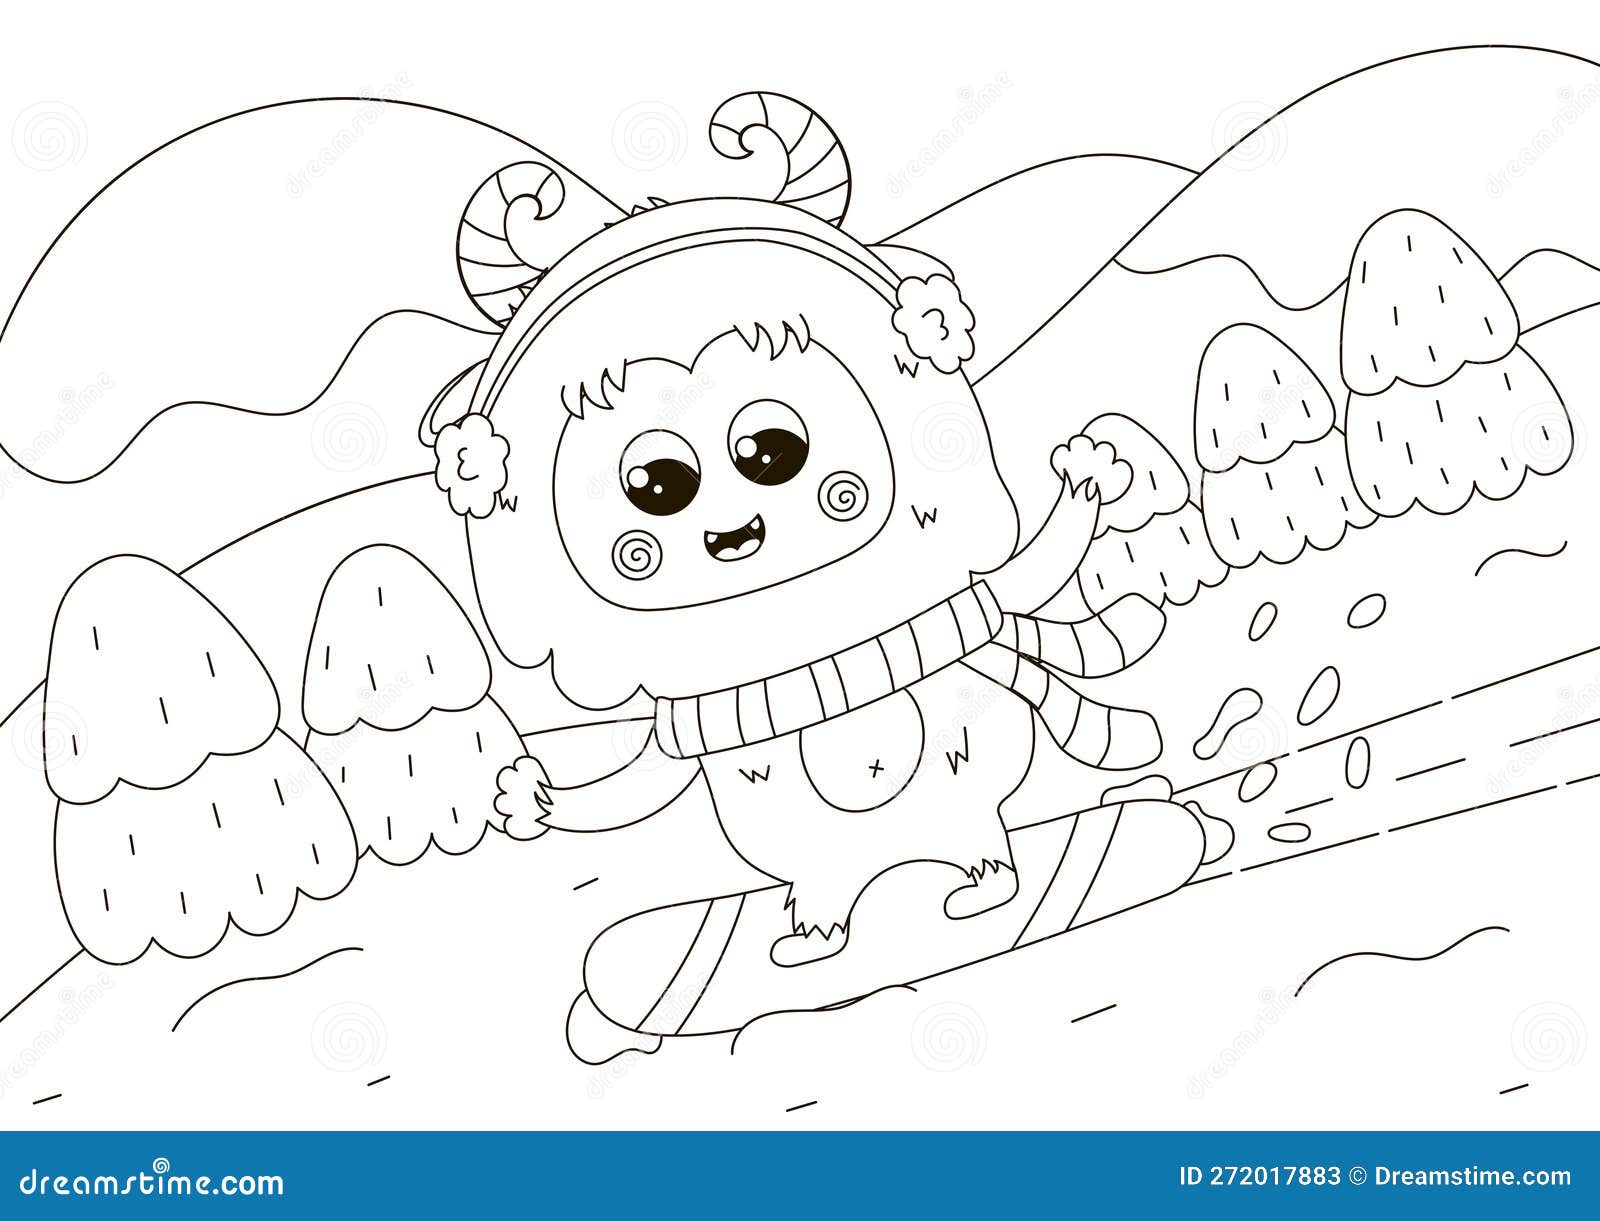 Funny coloring page with cute yeti character snowboarding stock vector